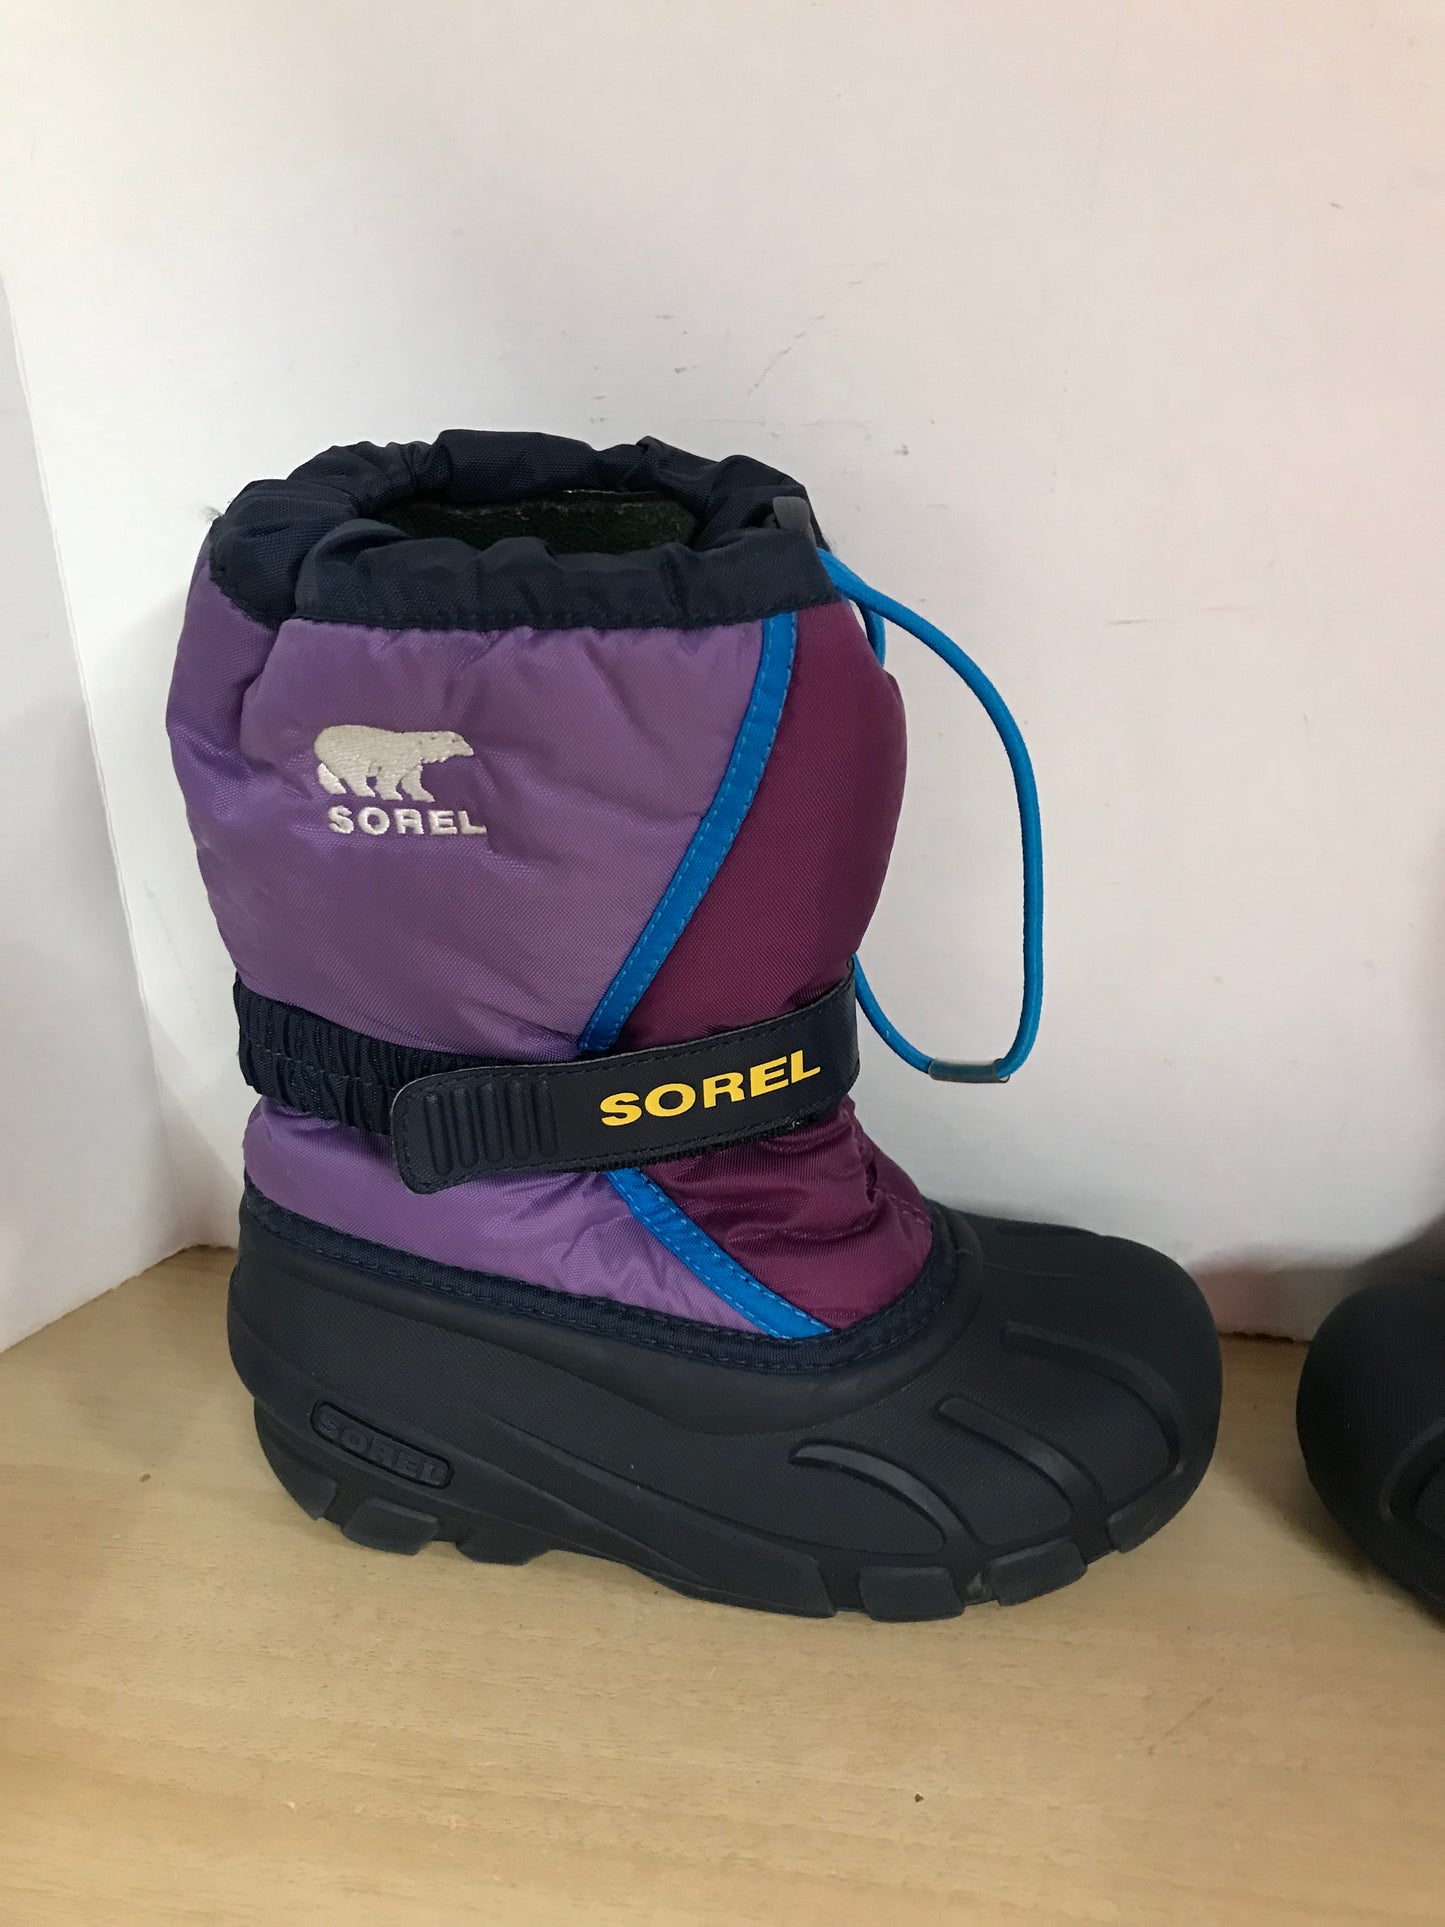 Winter Boots Child Size 1 Sorel Purple With Liner Excellent